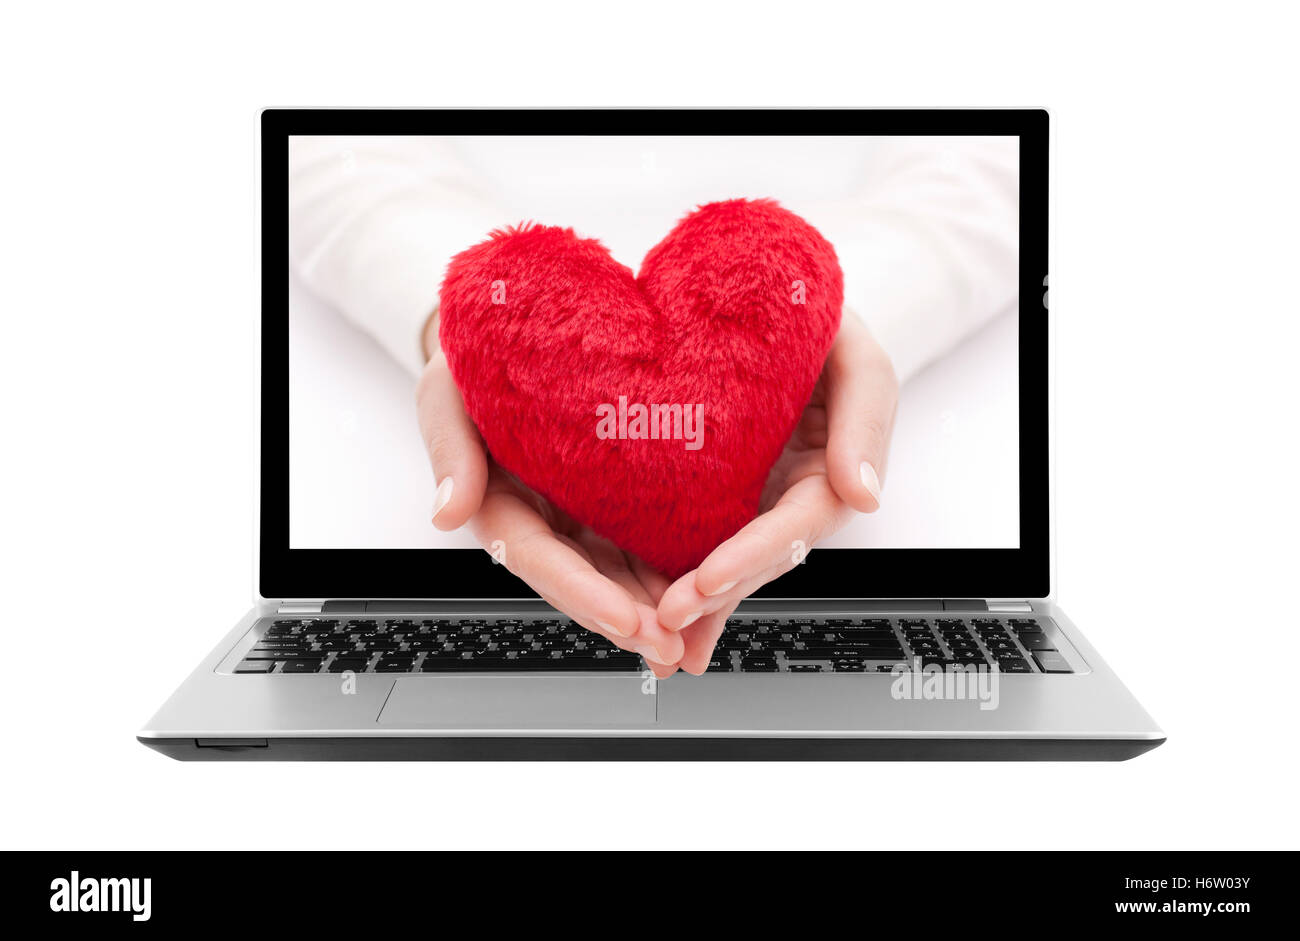 woman laptop notebook computers computer greeting finger health isolated medicinally medical female feeling romantic human Stock Photo